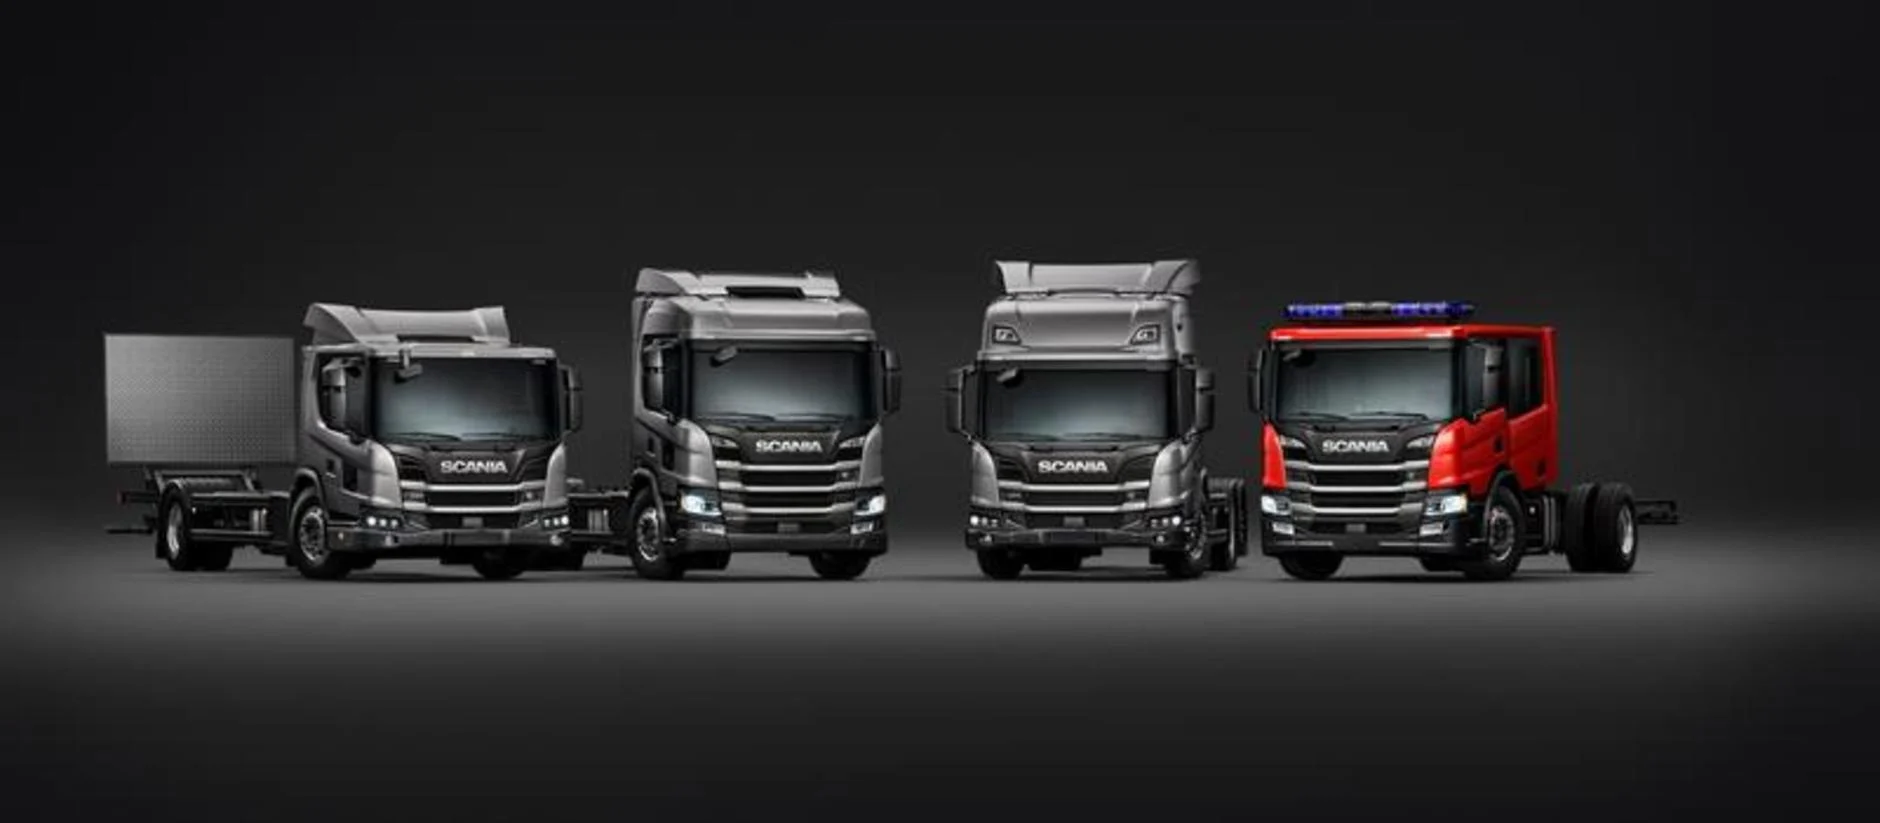 Scania Truck Development History and Advantages